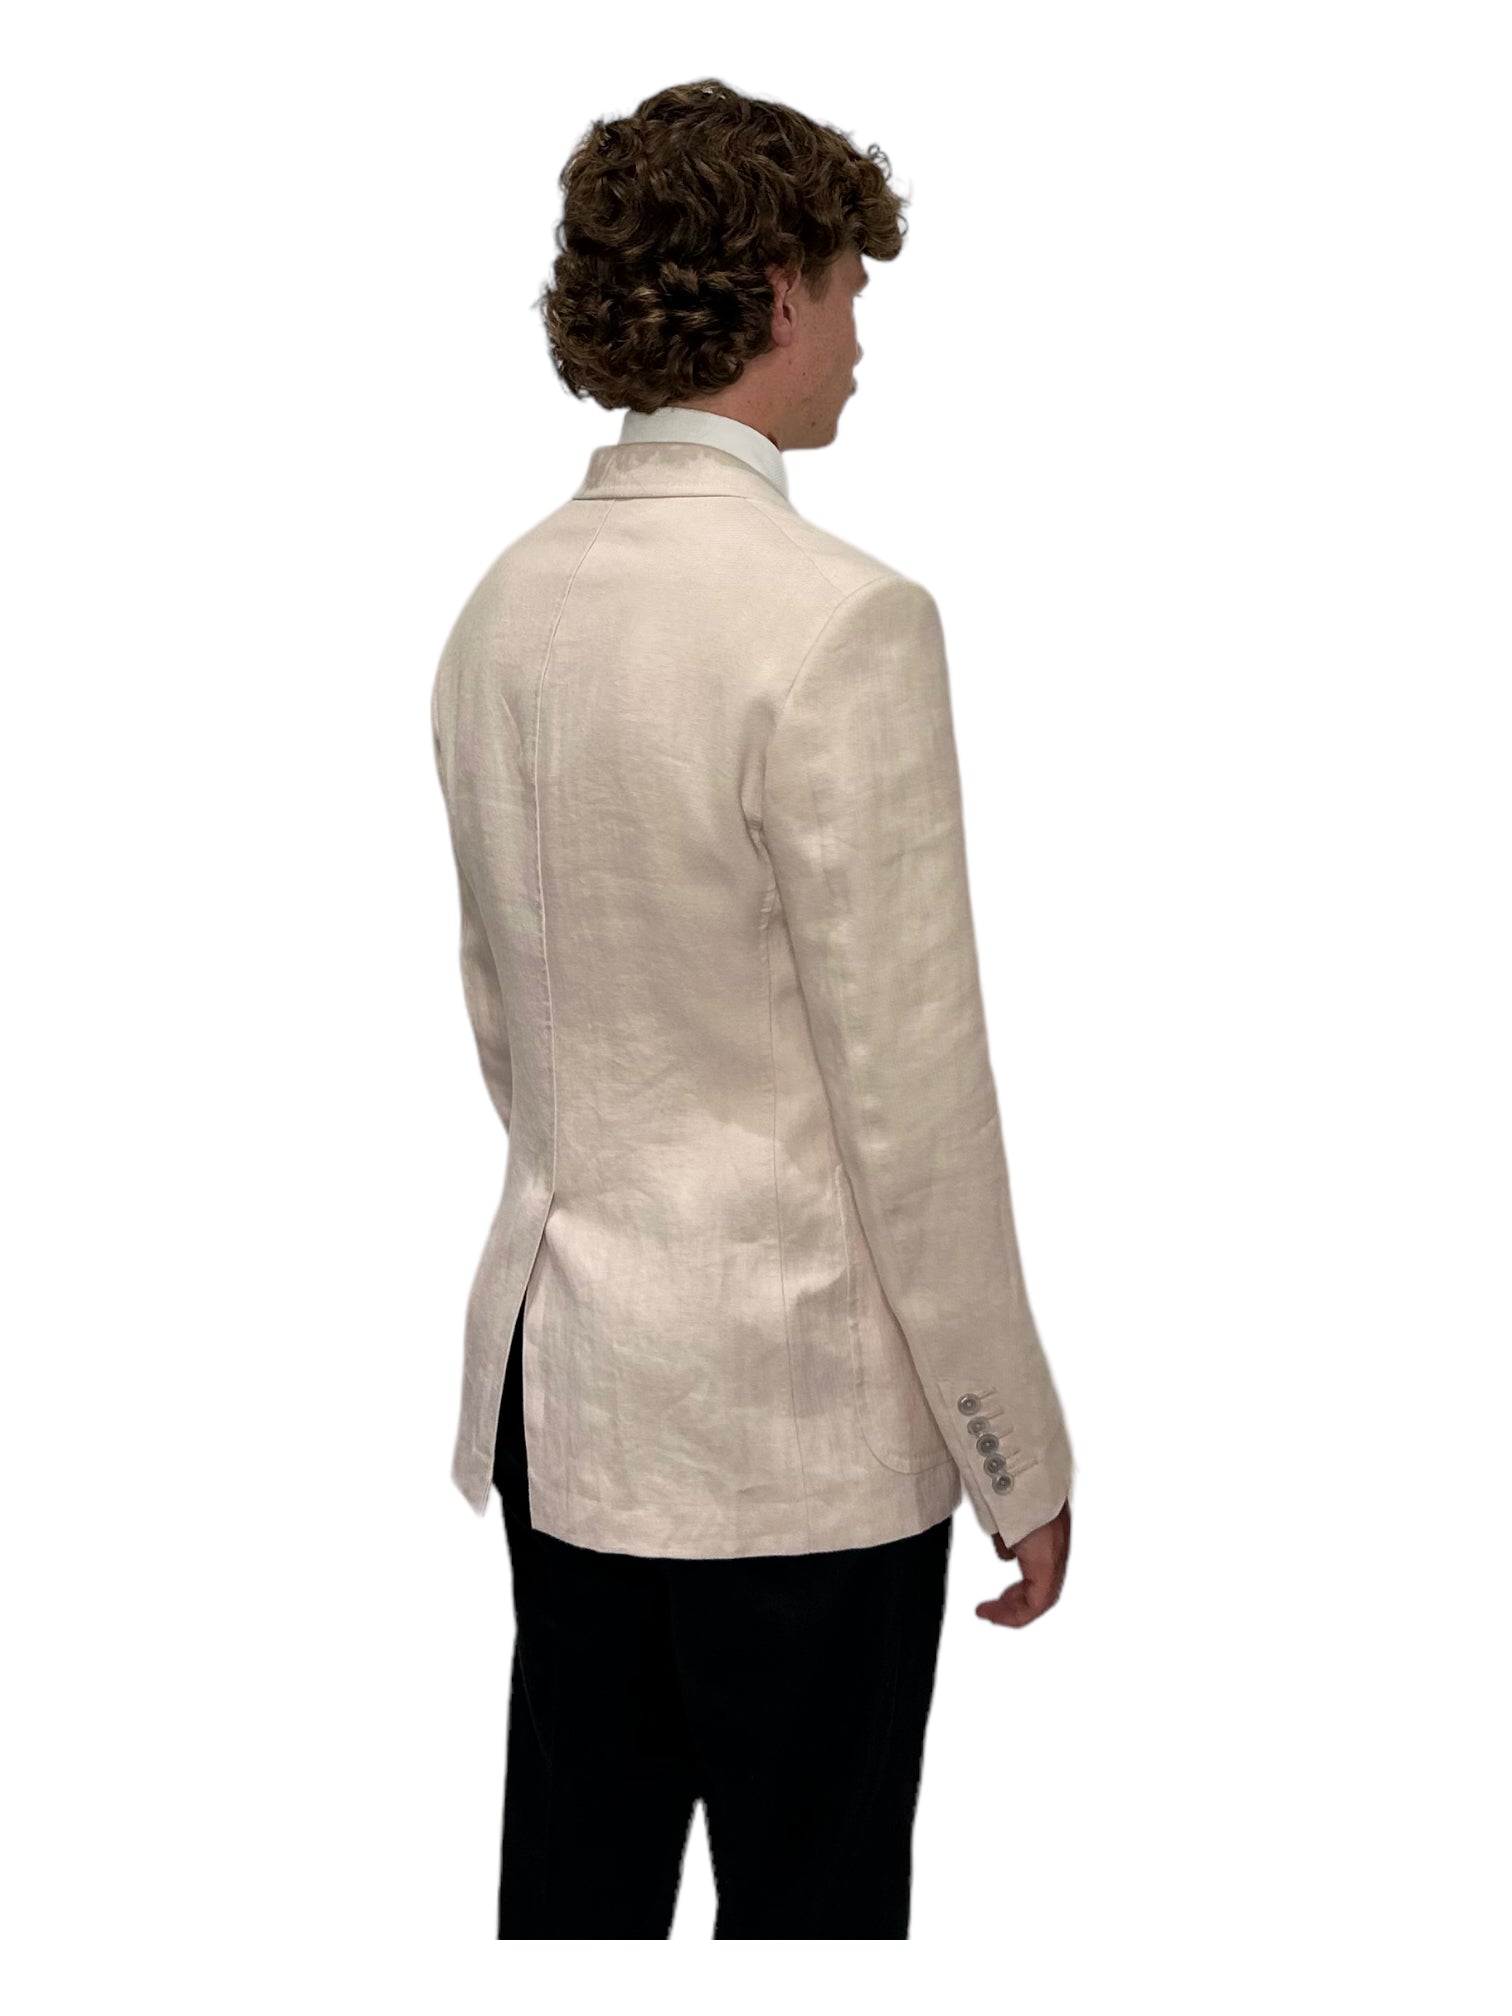 Tom Ford Cream Linen Blazer 38R - Genuine Design Luxury Consignment for Men. New & Pre-Owned Clothing, Shoes, & Accessories. Calgary, Canada